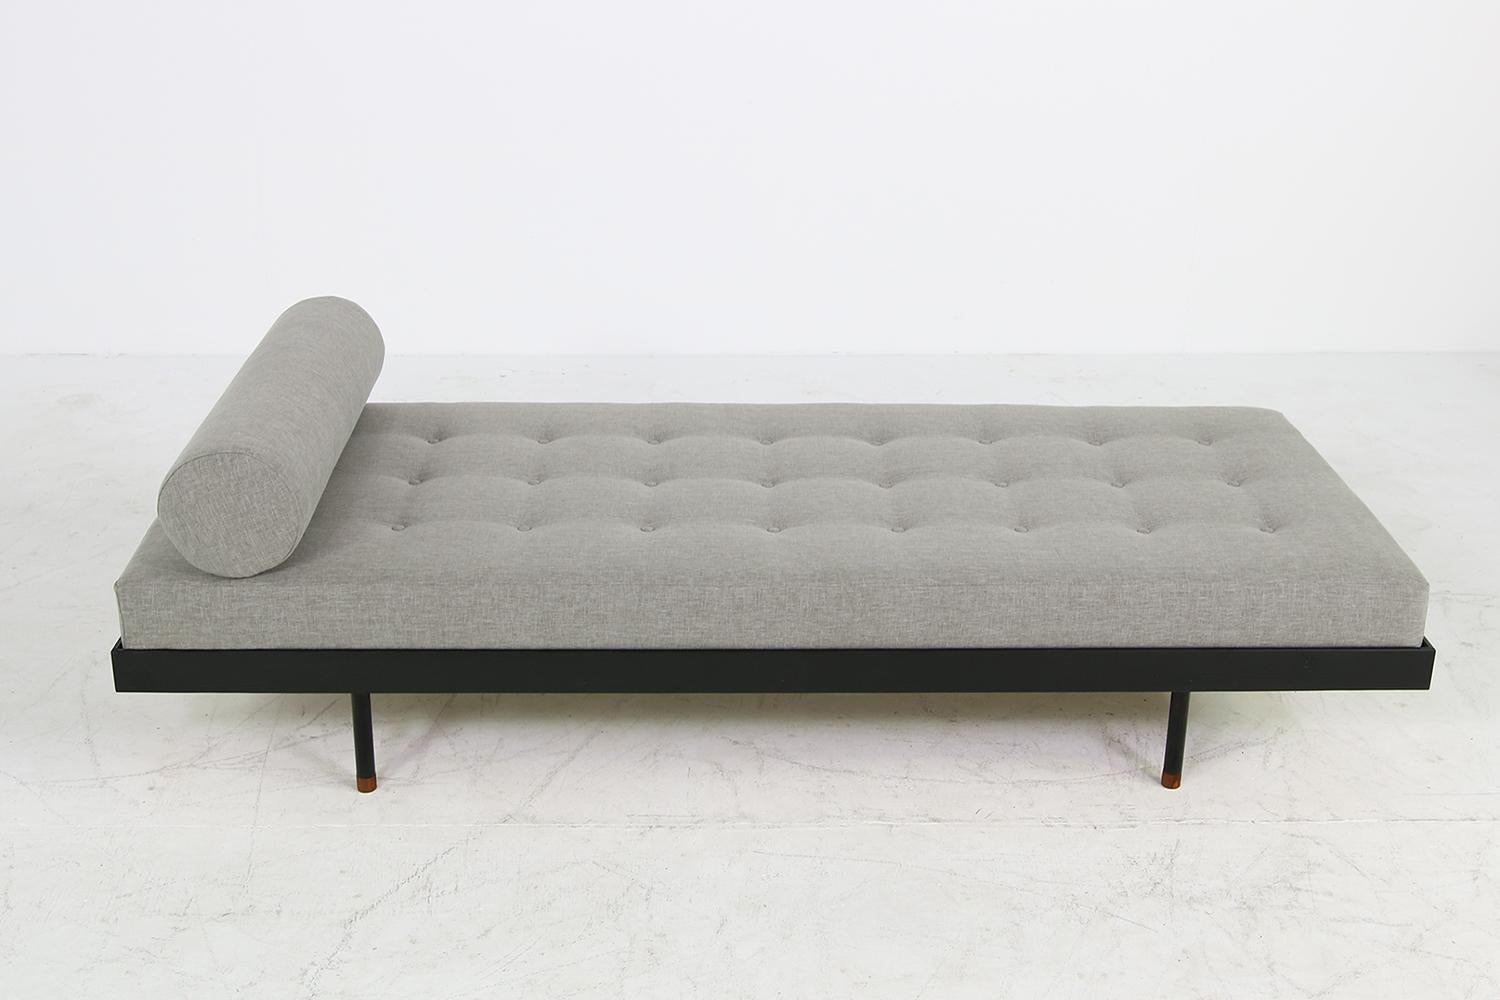 Beautiful Nathan Lindberg Siberian Larch wood (larix sibirica) daybed, black matte finish, all done in solid wood, metal base, Minimalist design, high density foam mattress, covered with high quality grey linen fabric, tufted - matching high quality